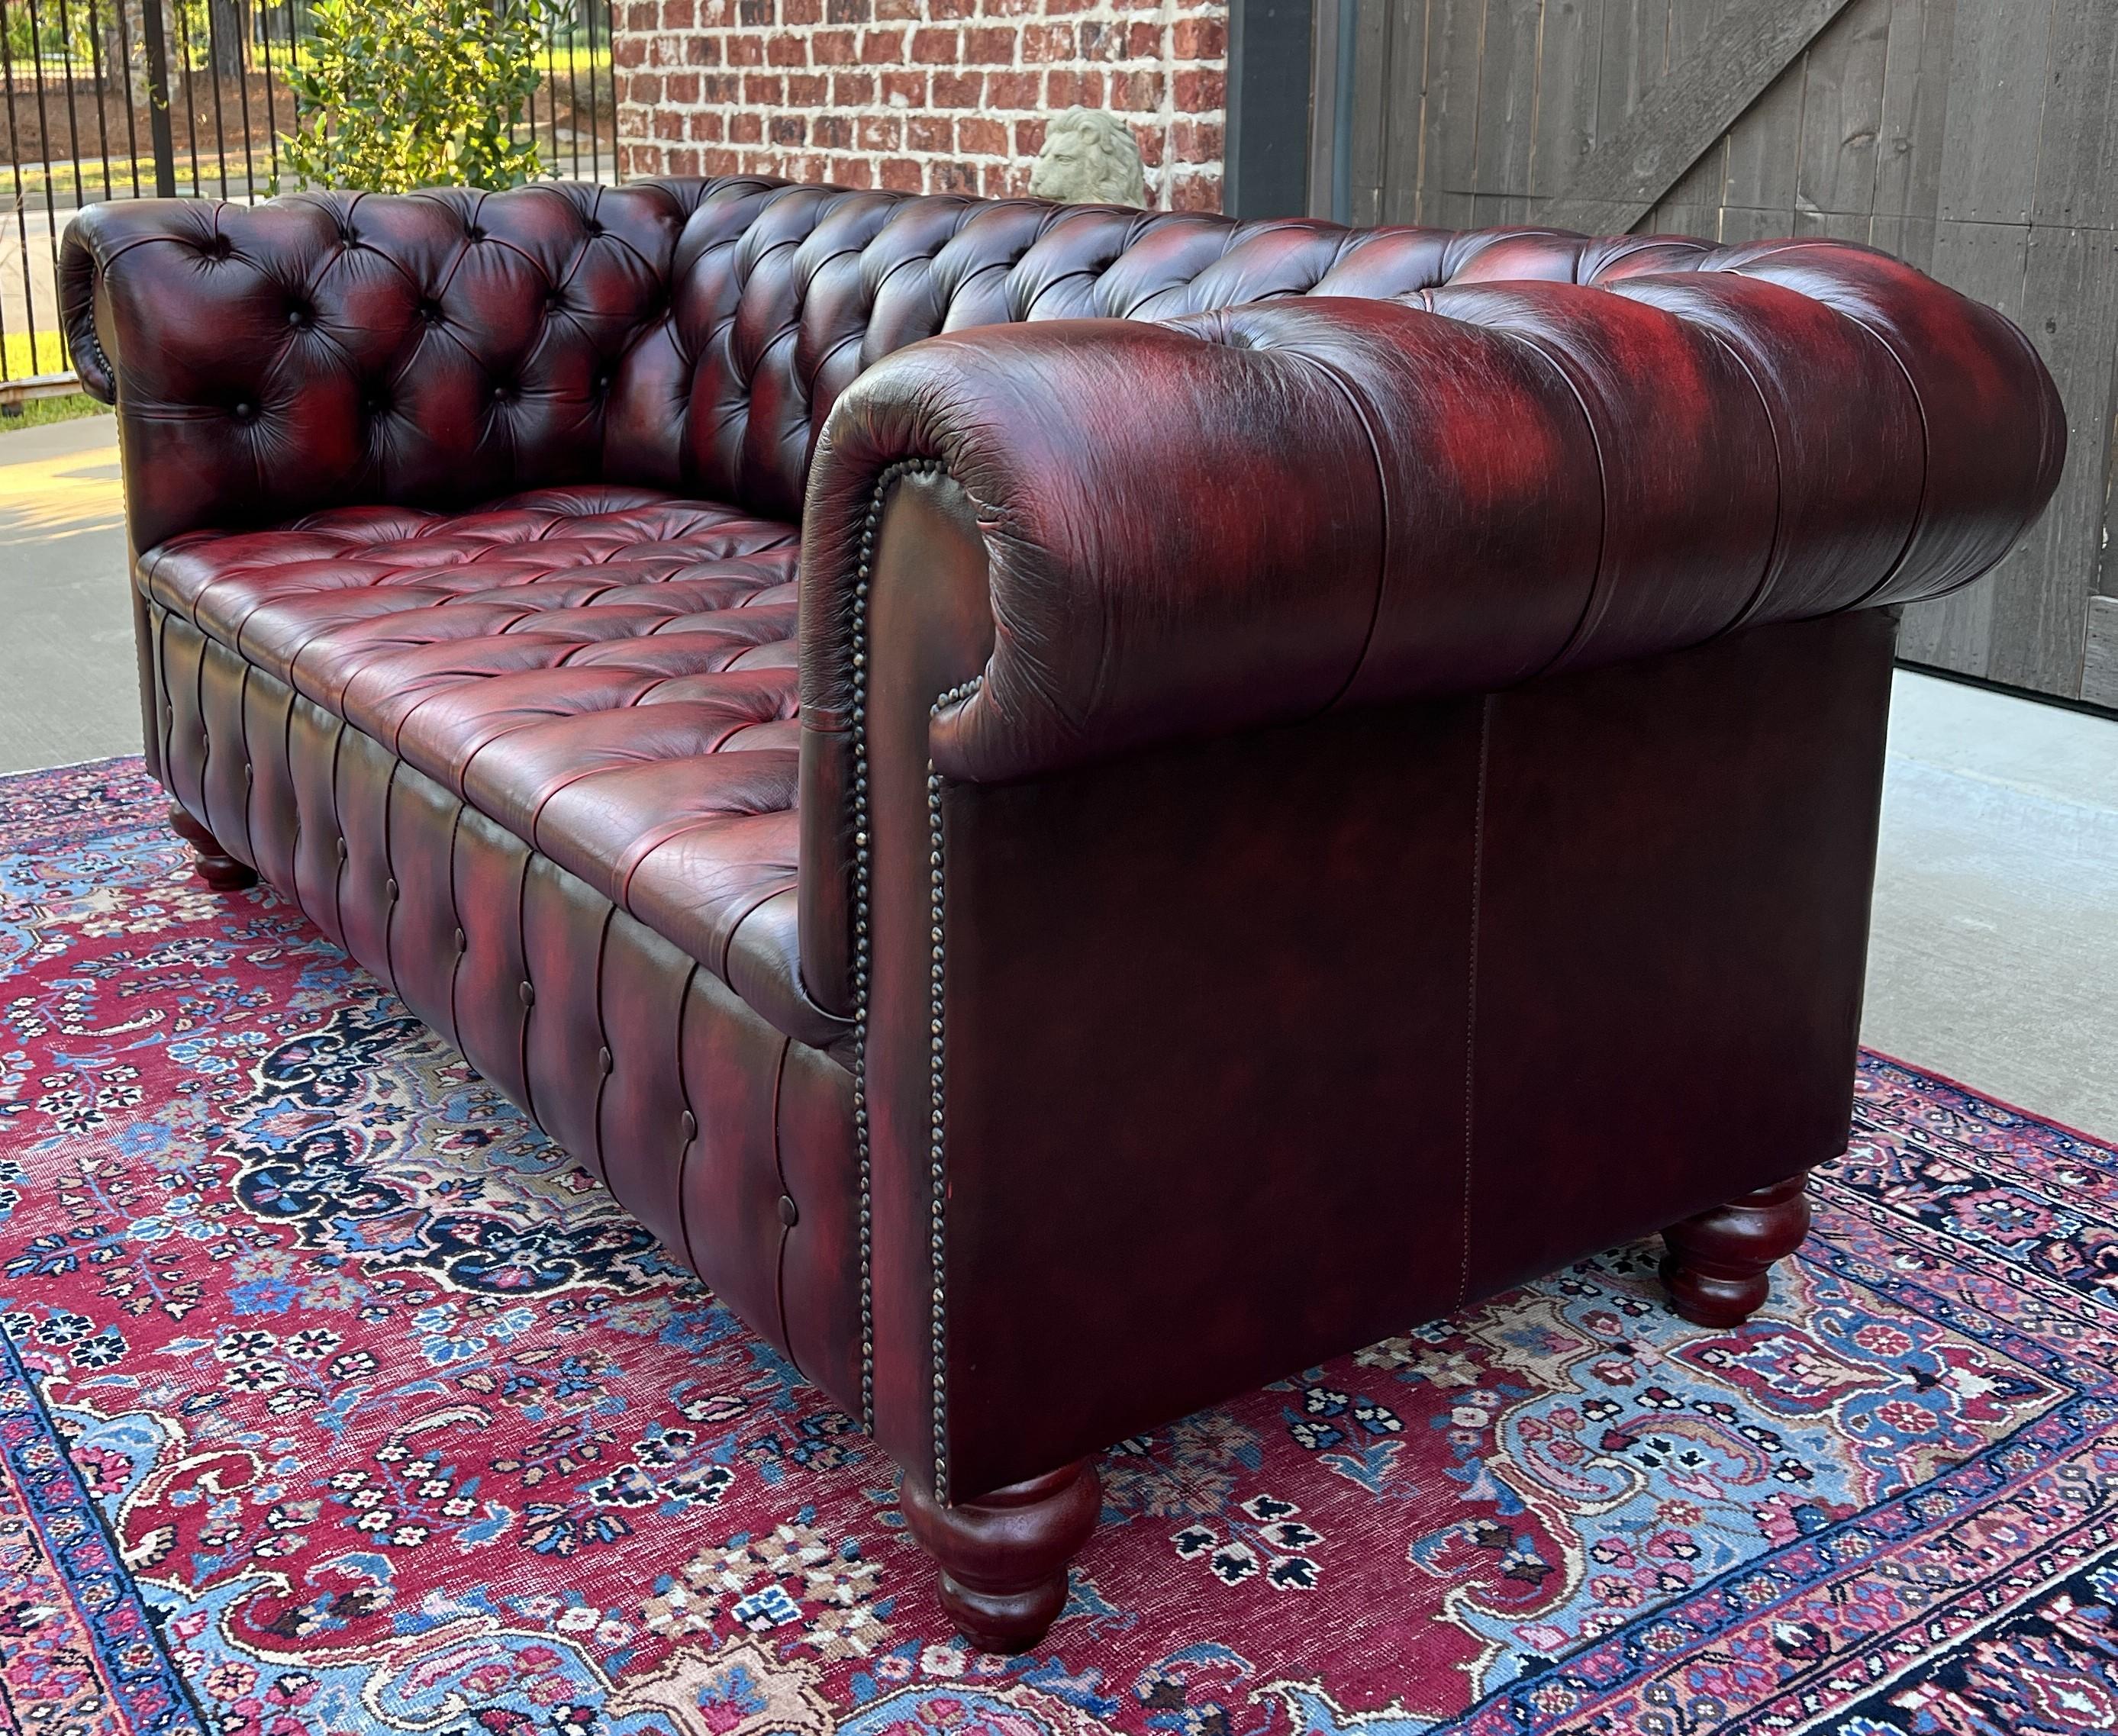 Vintage English Chesterfield Sofa Leather Tufted Seat Oxblood Red Mid-Century #1 6